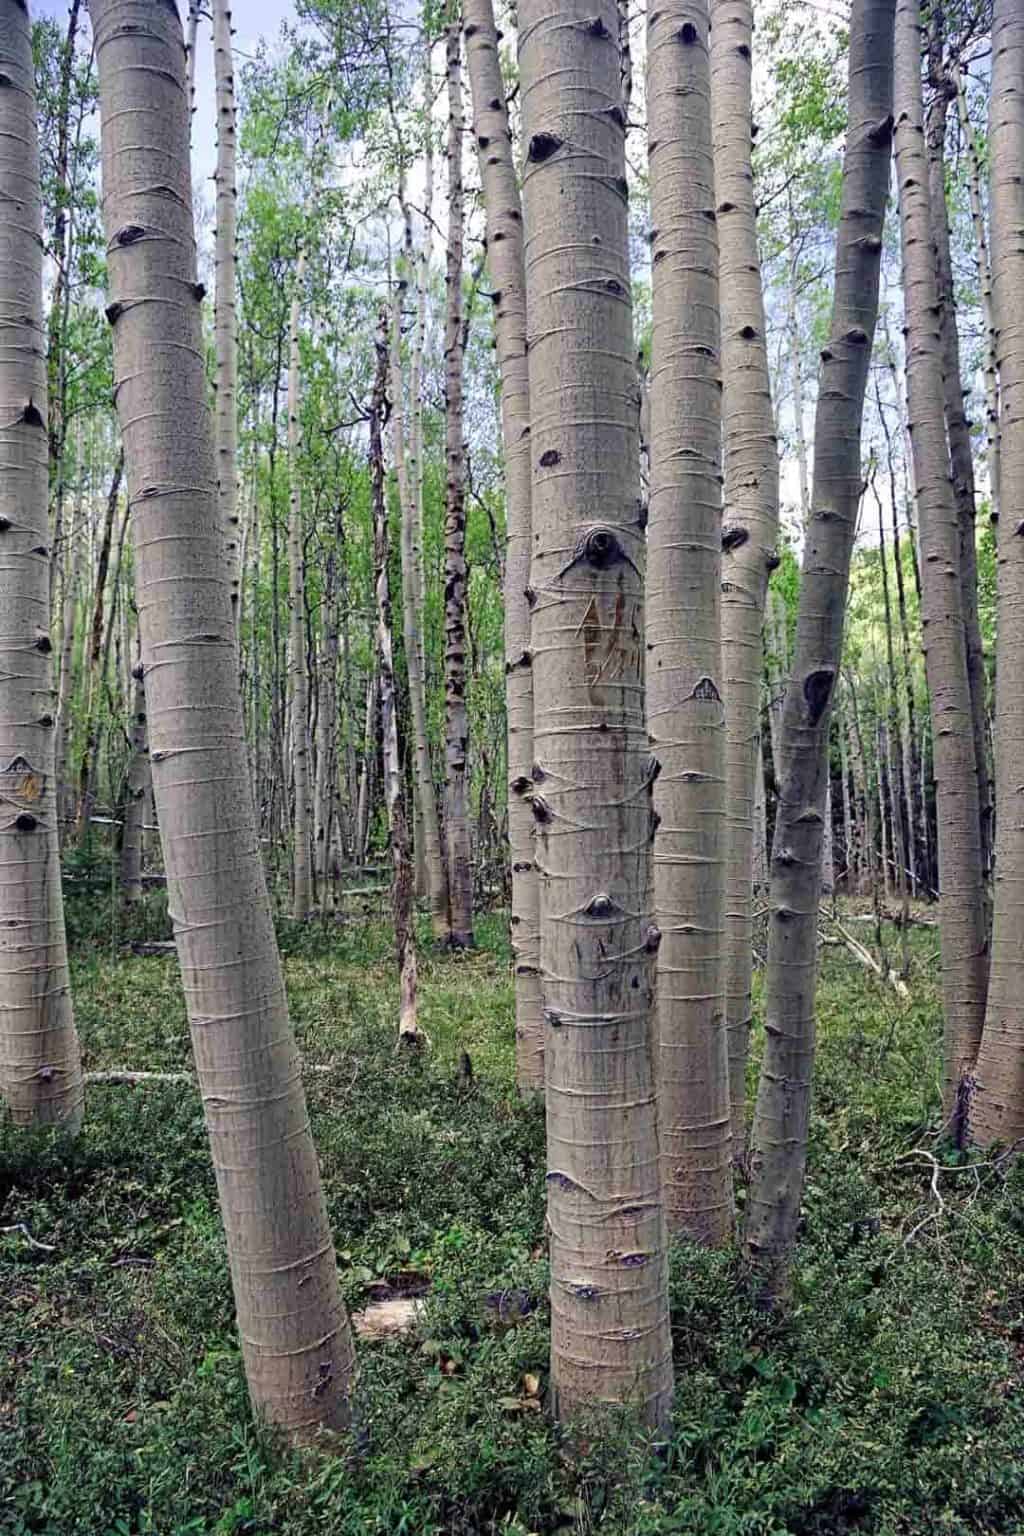 A forest of aspen trees near Frisco, Colorado full of new spring blooms.